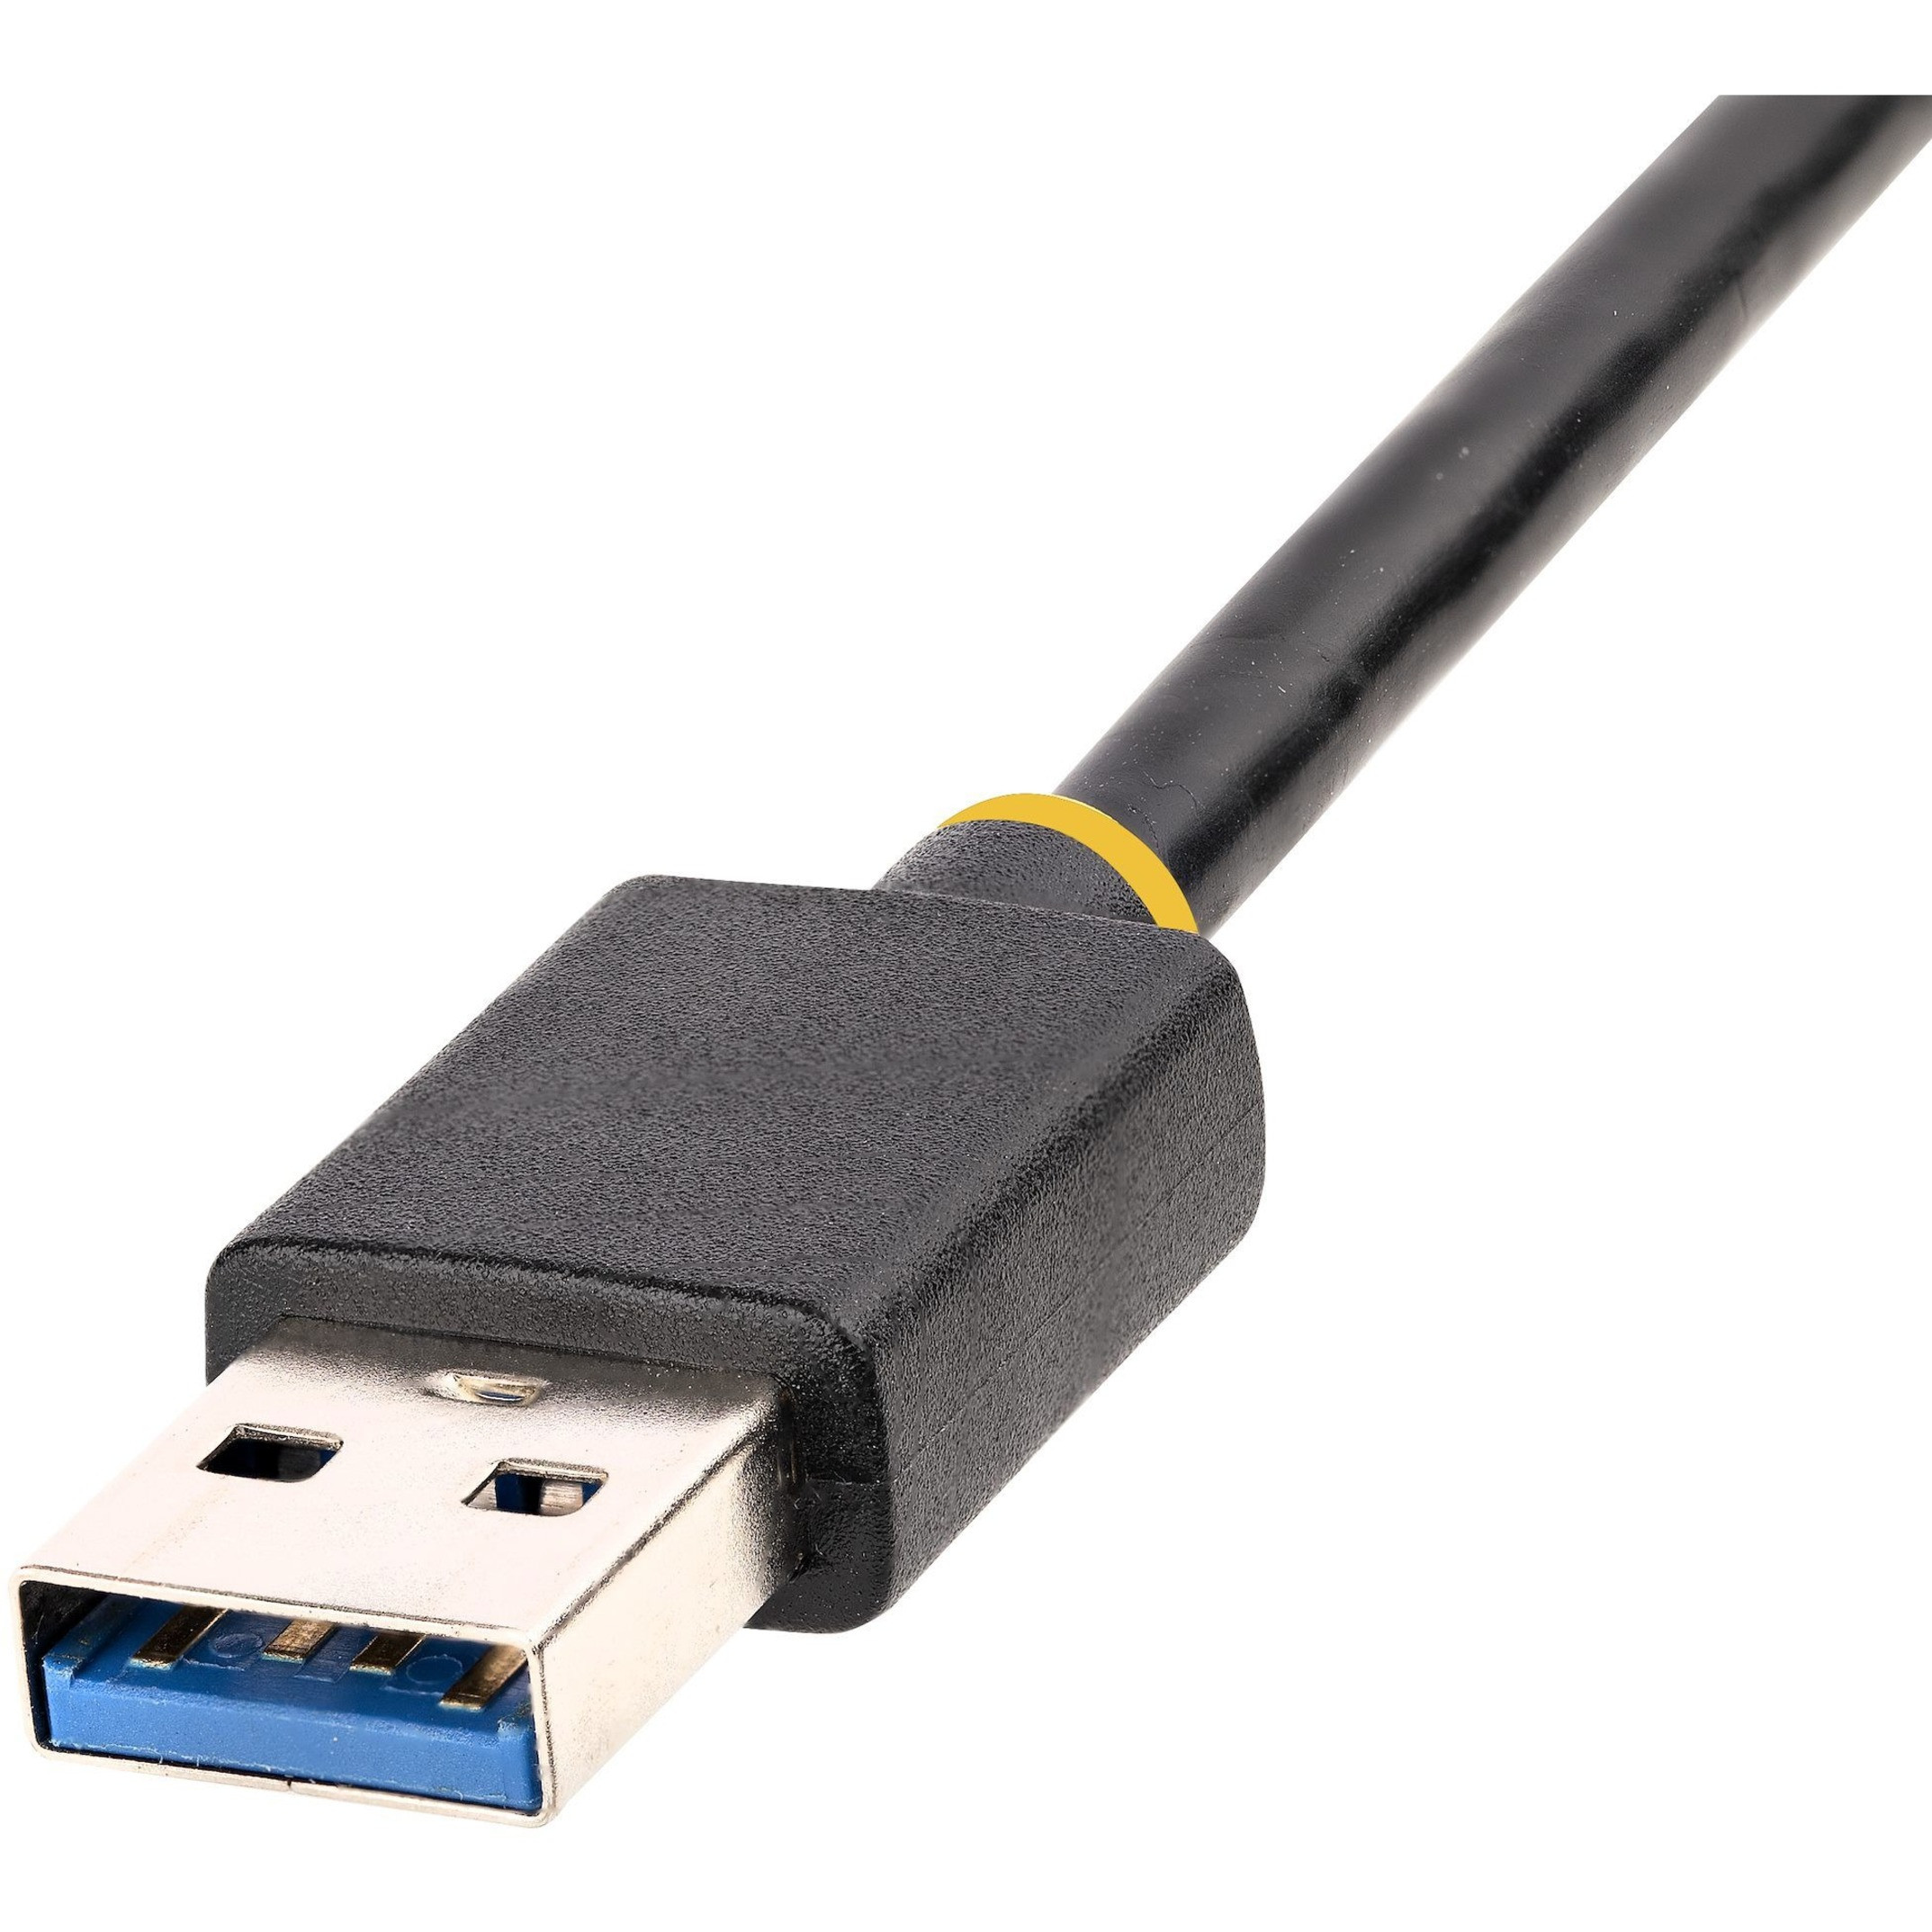 wekelijks Ontstaan bitter Startech .com USB to Ethernet Adapter, USB 3.0 to 10/100/1000 Gigabit Ethernet  LAN Adapter, 11.8in/30cm Attached Cable, USB to RJ45 Adapter -...  USB31000S2 - Corporate Armor